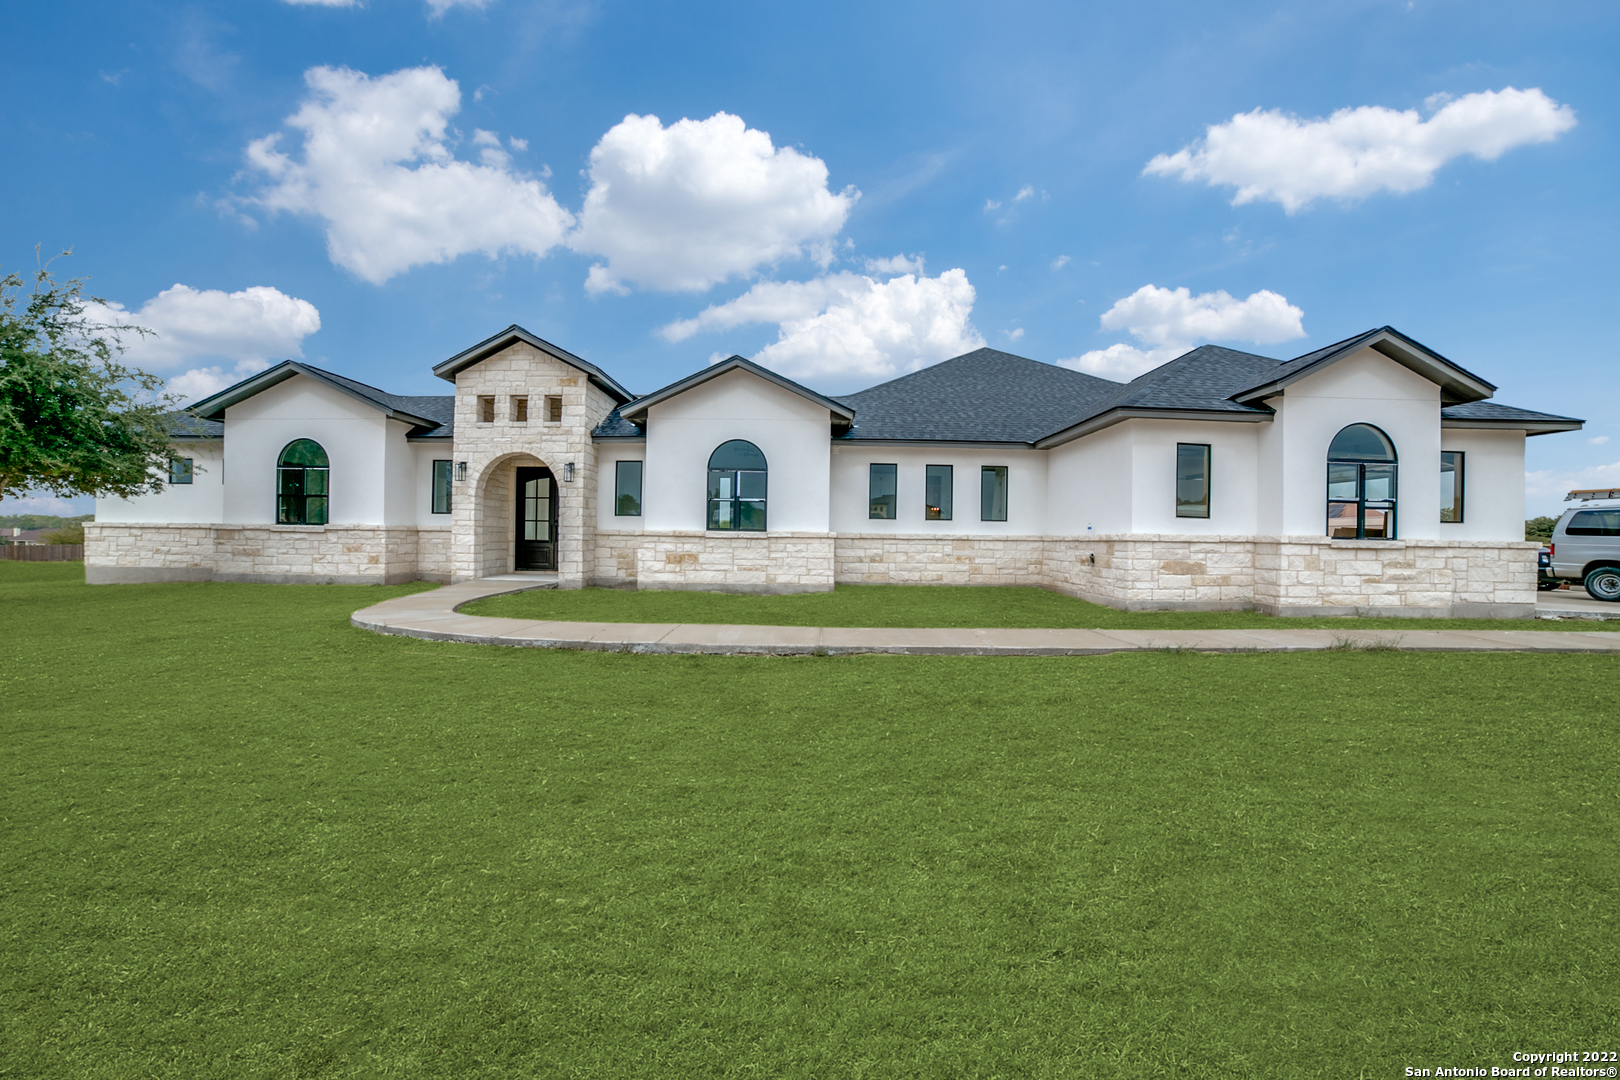 This gorgeous, custom-built home has recently been built with modern finishes and a floor plan built for entertaining. Upon arrival, the striking stone exterior welcomes guests before entering through the majestic arched entry. Through the dedicated entry, soaring ceilings are accented by picture windows and an immaculate interior color palette. The spacious open floor plan showcases a stunning floor-to-ceiling electric fireplace with tile accent in the living space. The gourmet kitchen is sure to be a chef's vision with ample white cabinetry and contrasting hardware. The center island will also be suitable for bar seating. The spacious dining will host plenty for holiday gatherings and more. Retreat to the luxurious primary suite with natural lighting and a spa-like en suite with a walk-in closet designed for a shopaholic. Three secondary bedrooms and an office space complete the interior. Convenient to neighborhood amenities including a play area and enjoy views to the small lake , come see this stunning property today!